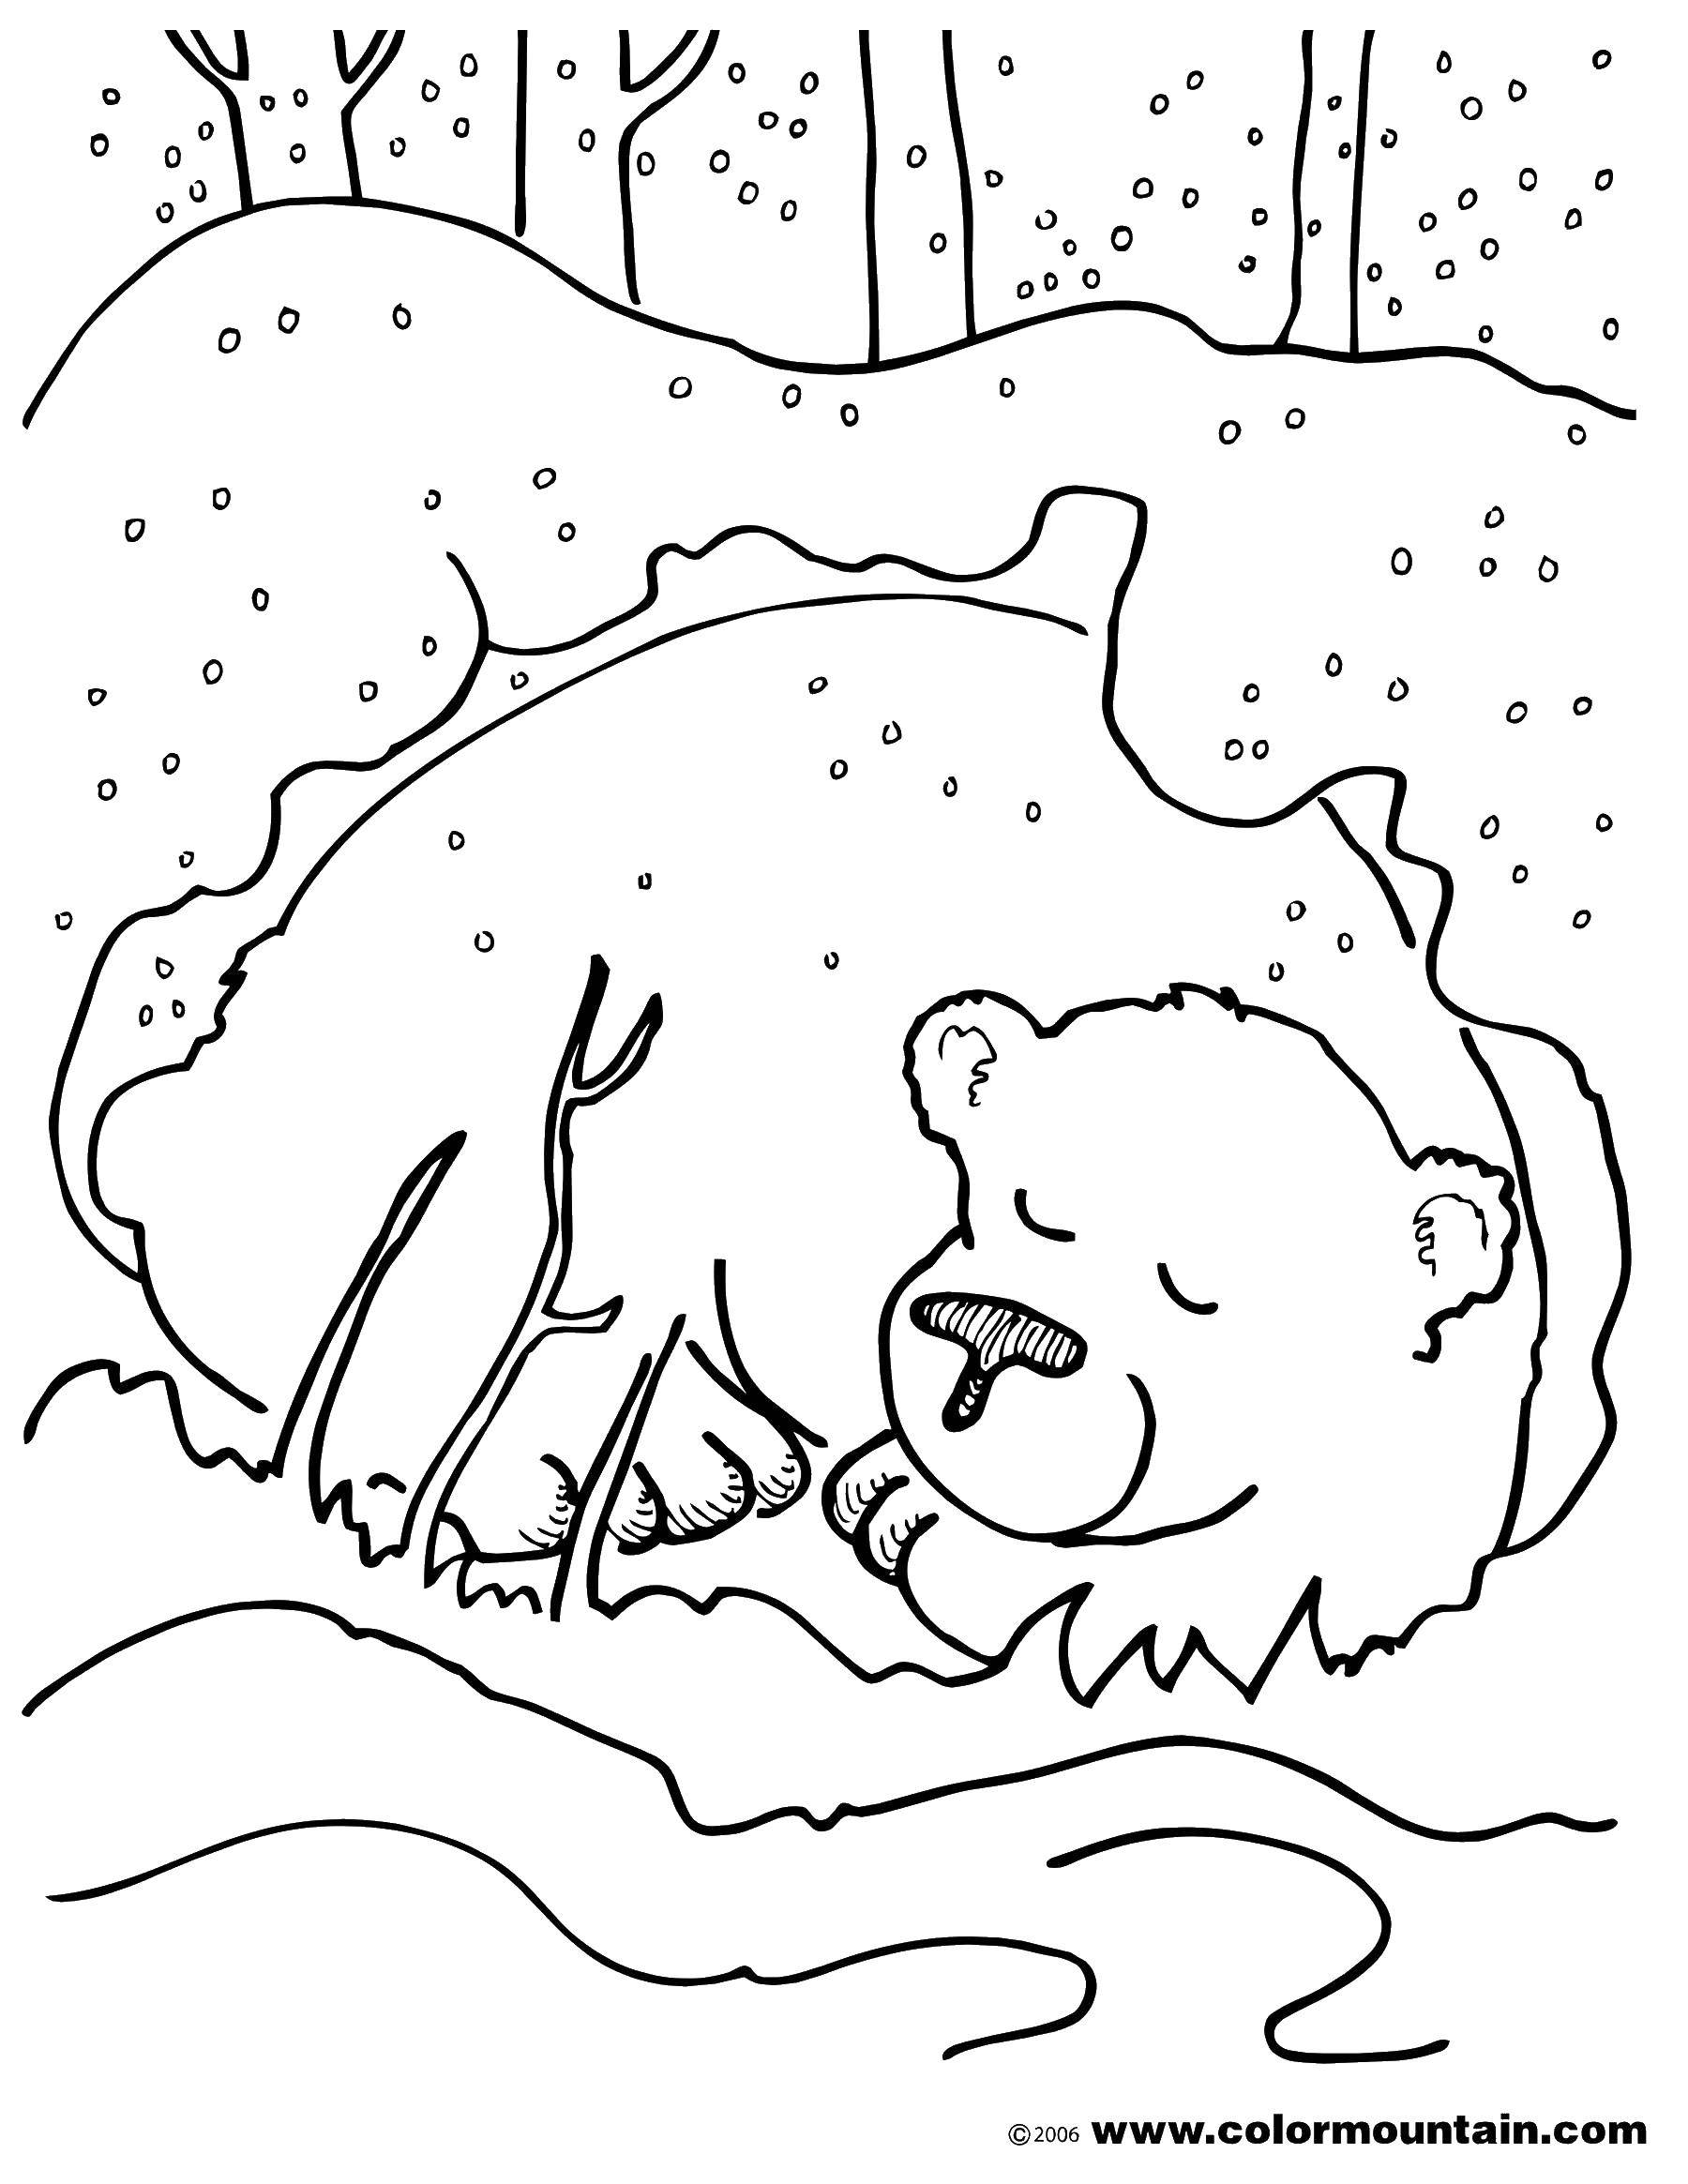 Coloring Bear under the snow. Category Animals. Tags:  animals, bears, winter, snow.